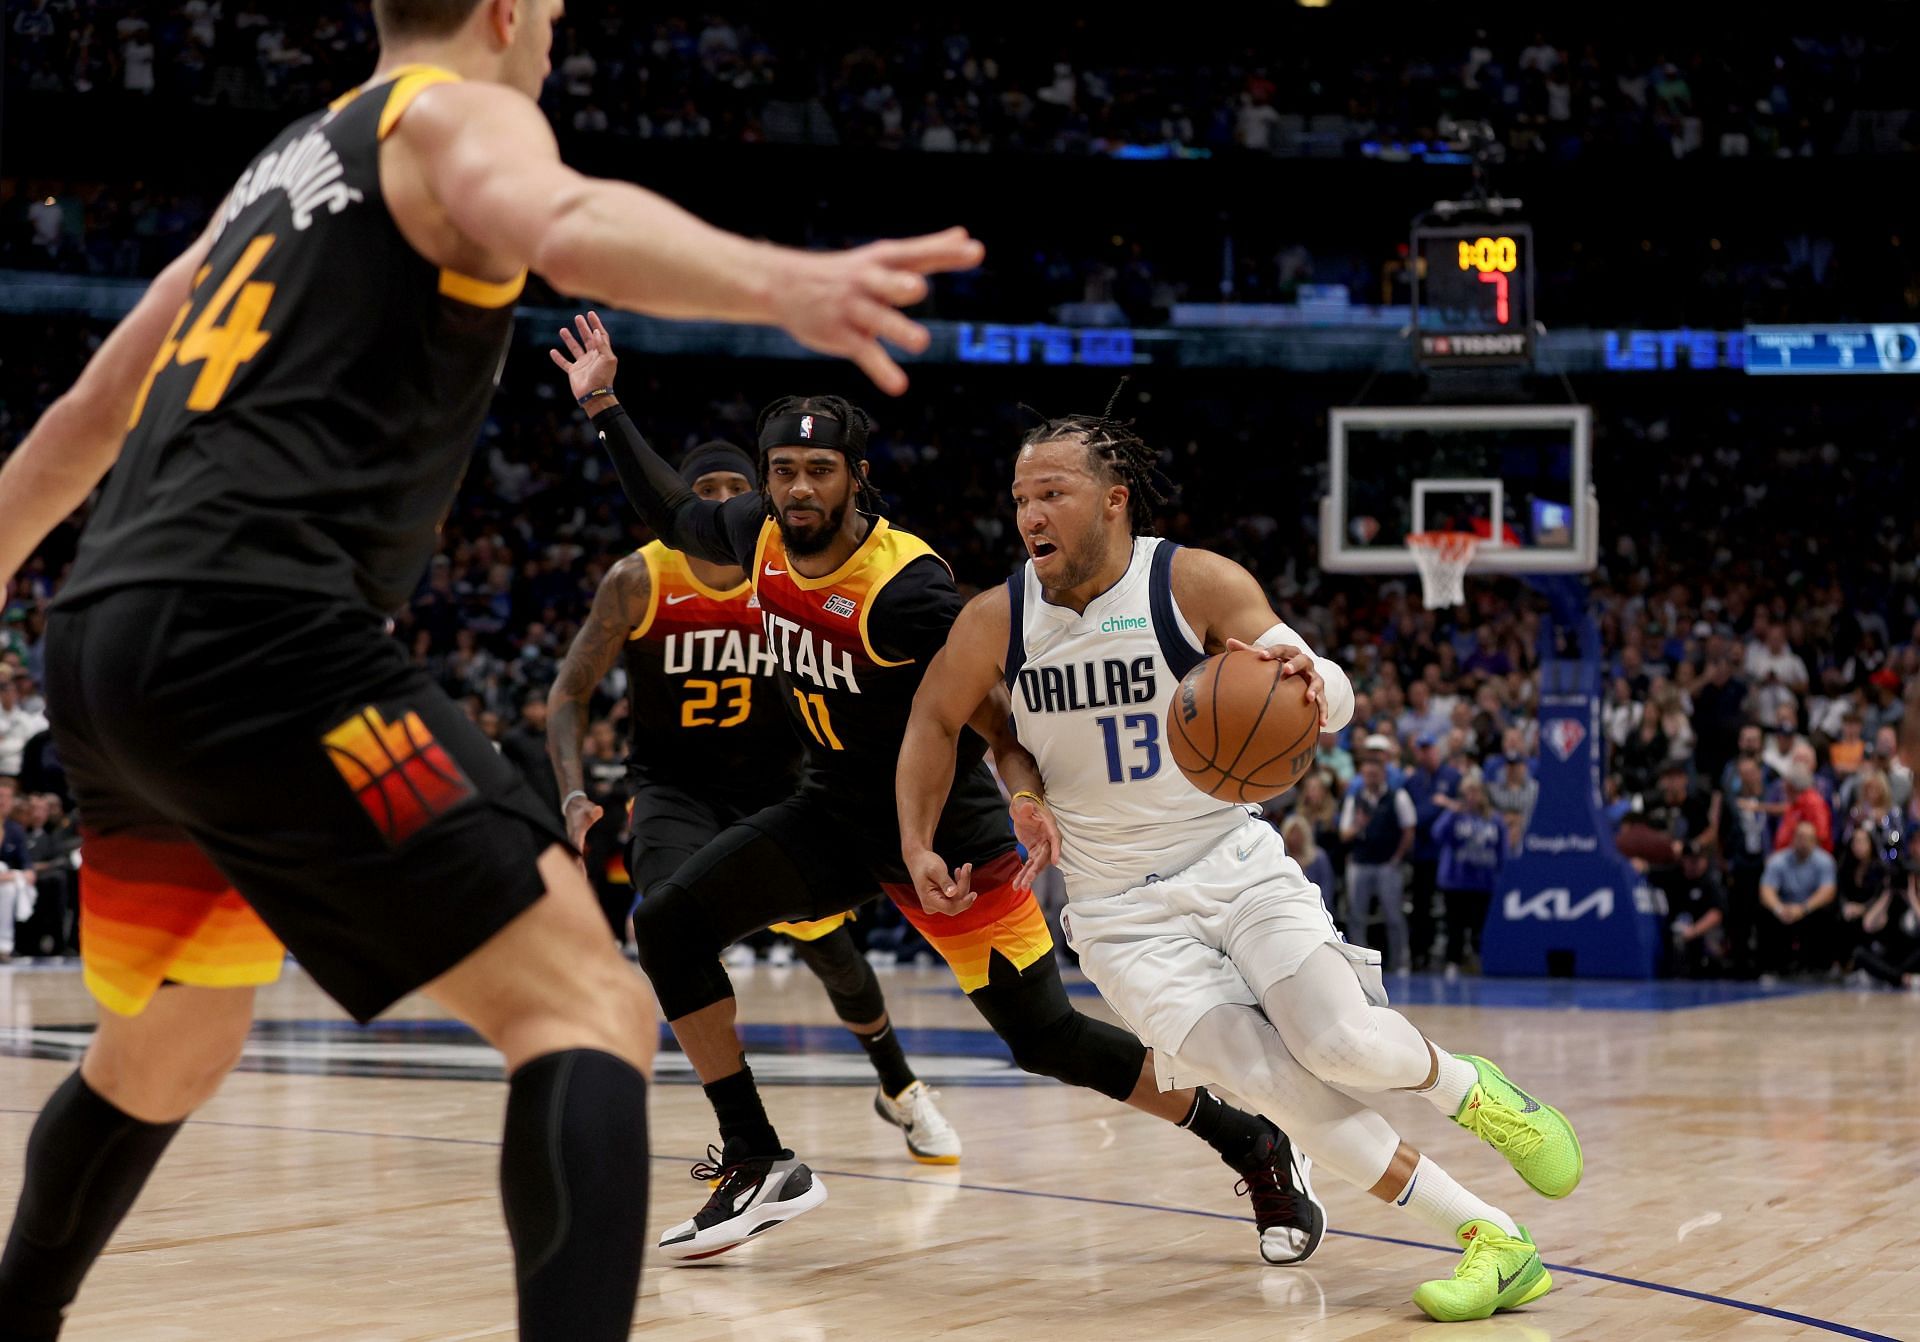 This time on the road, Jalen Brunson of the Dallas Mavericks will look to carry his team again.